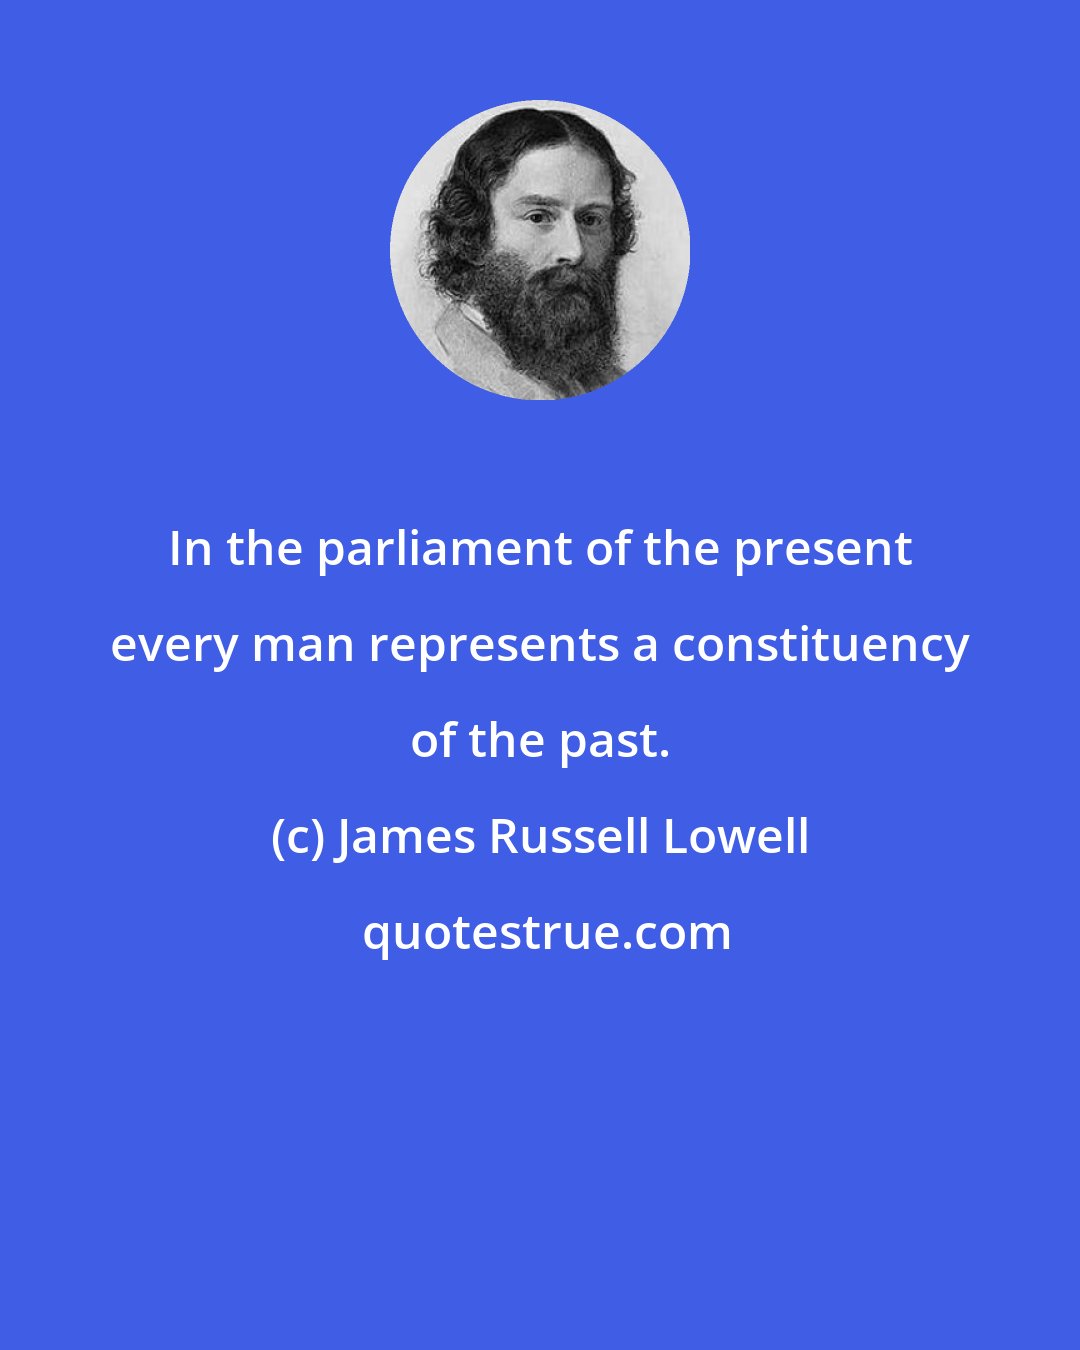 James Russell Lowell: In the parliament of the present every man represents a constituency of the past.